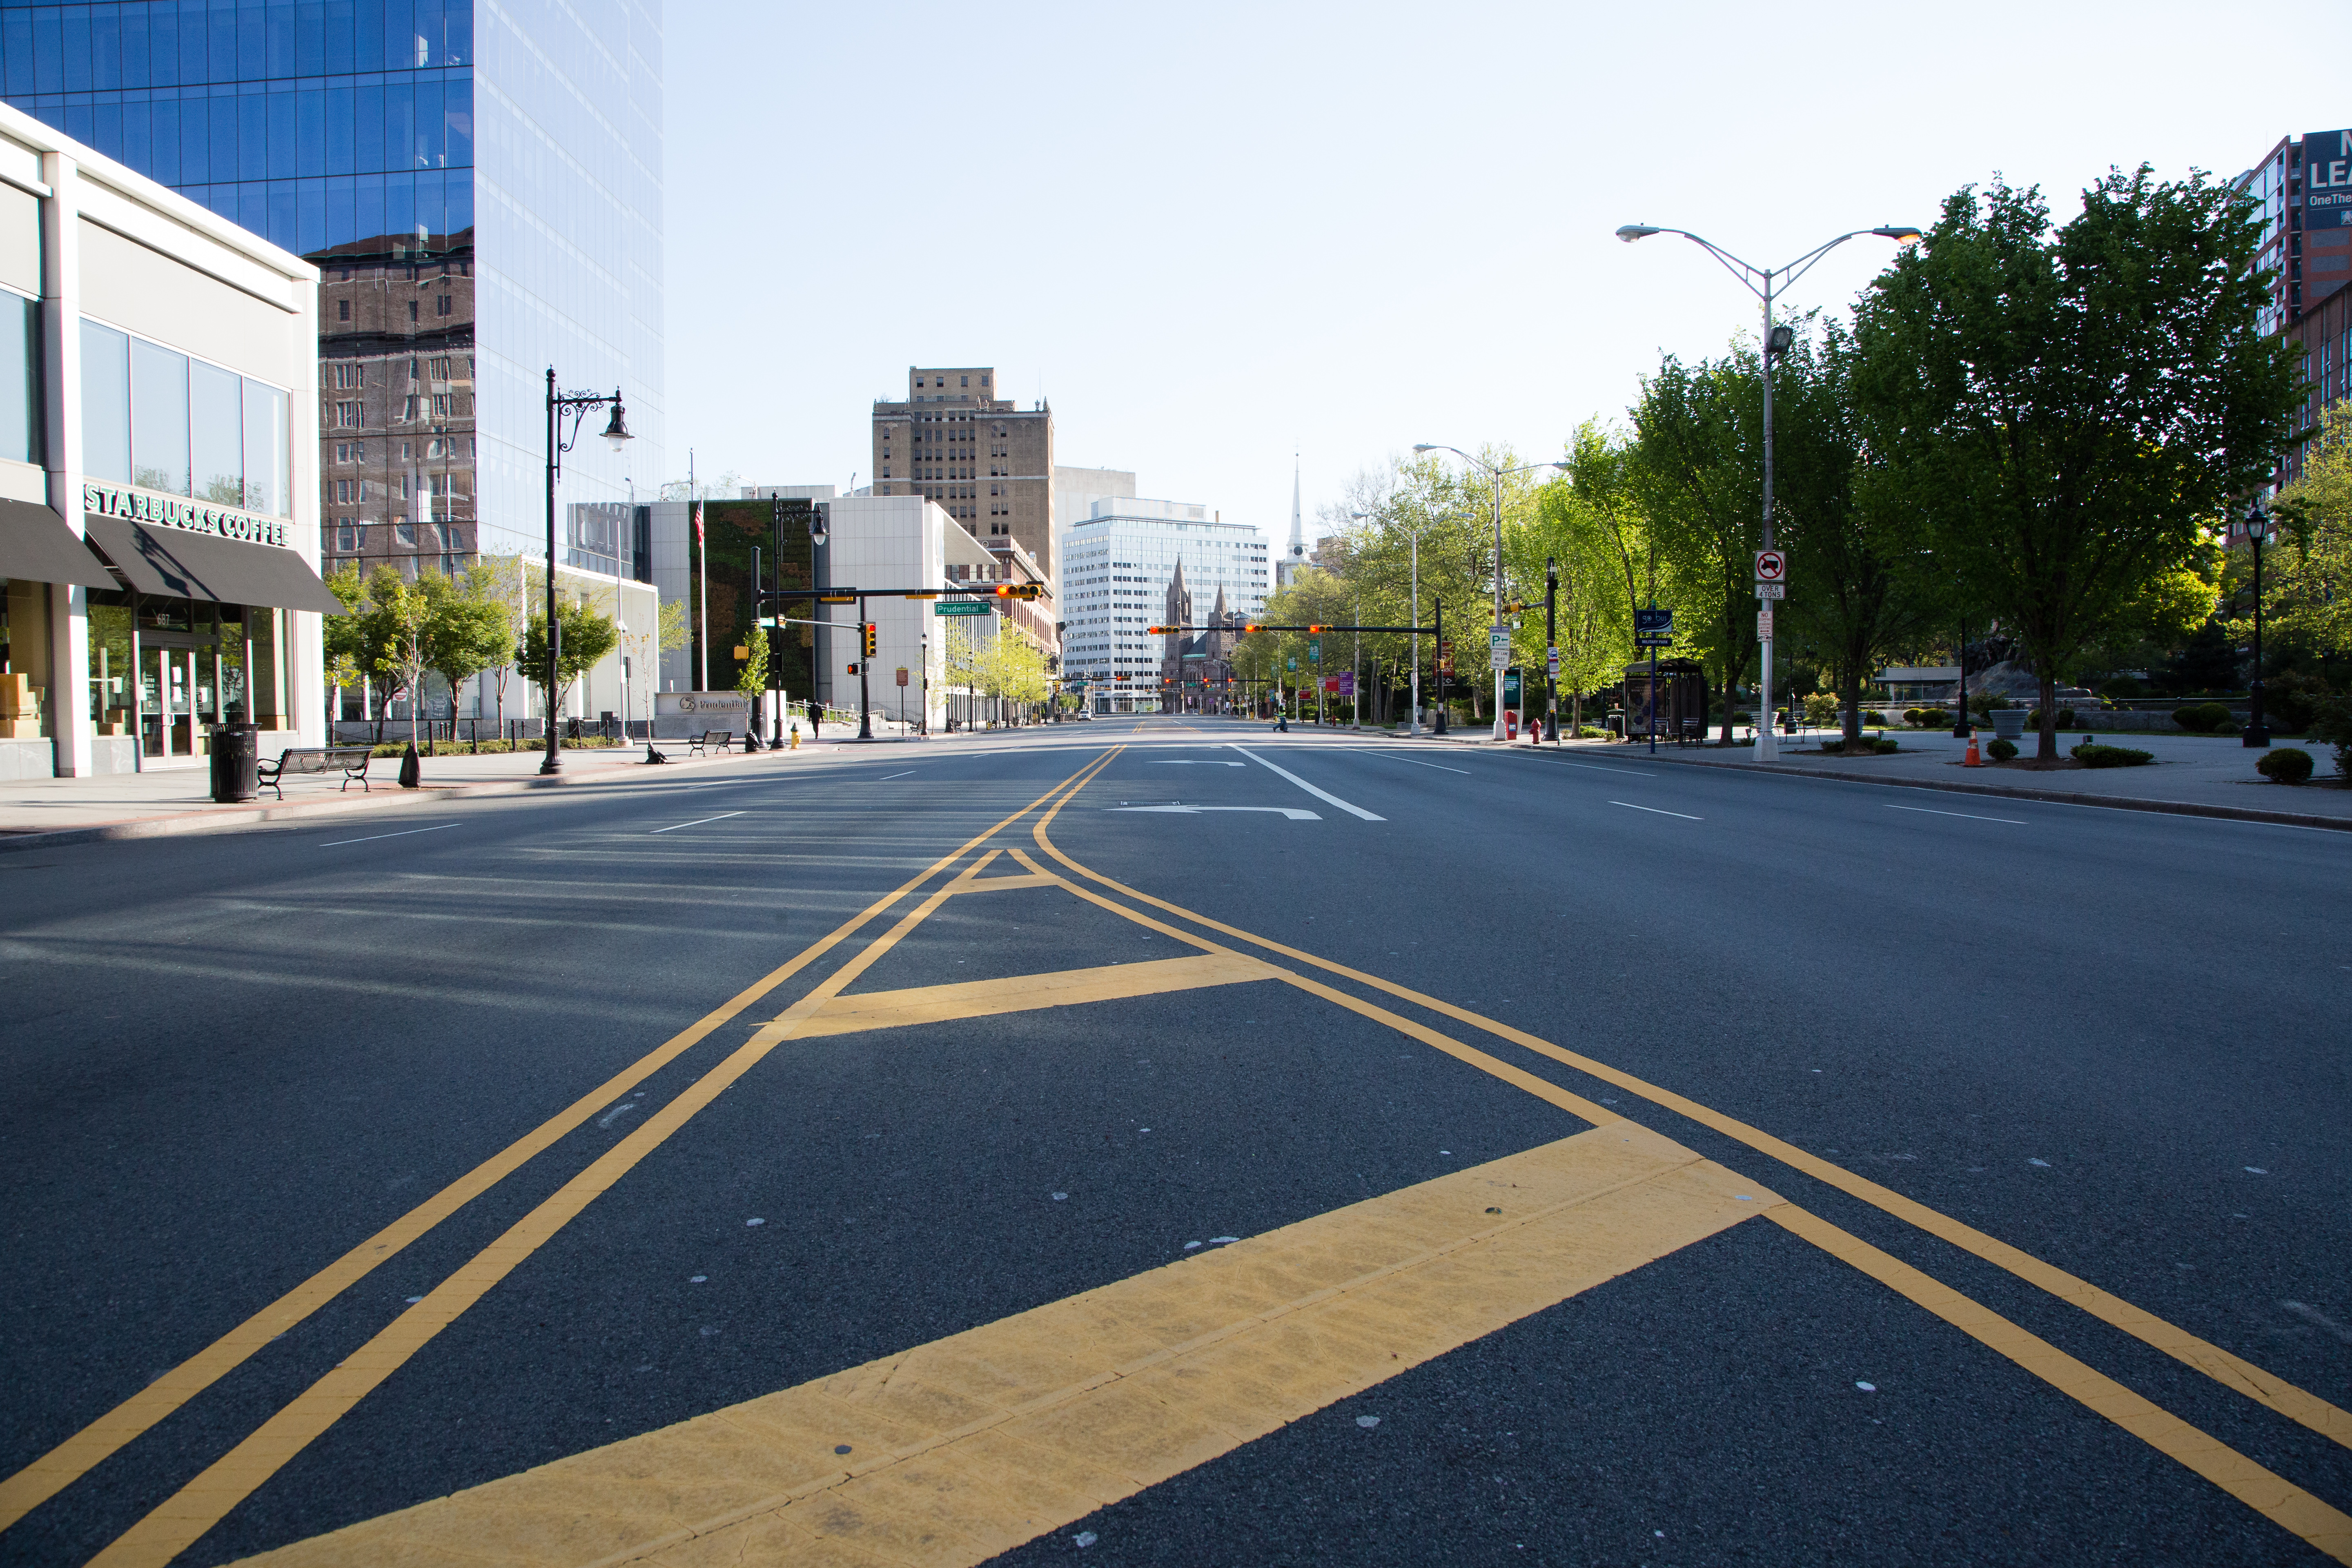 Broad Street sits empty during Newark’s city wide shelter-in-place mandate during the ongoing coronavirus pandemic on May 09, 2020 in Newark, New Jersey.